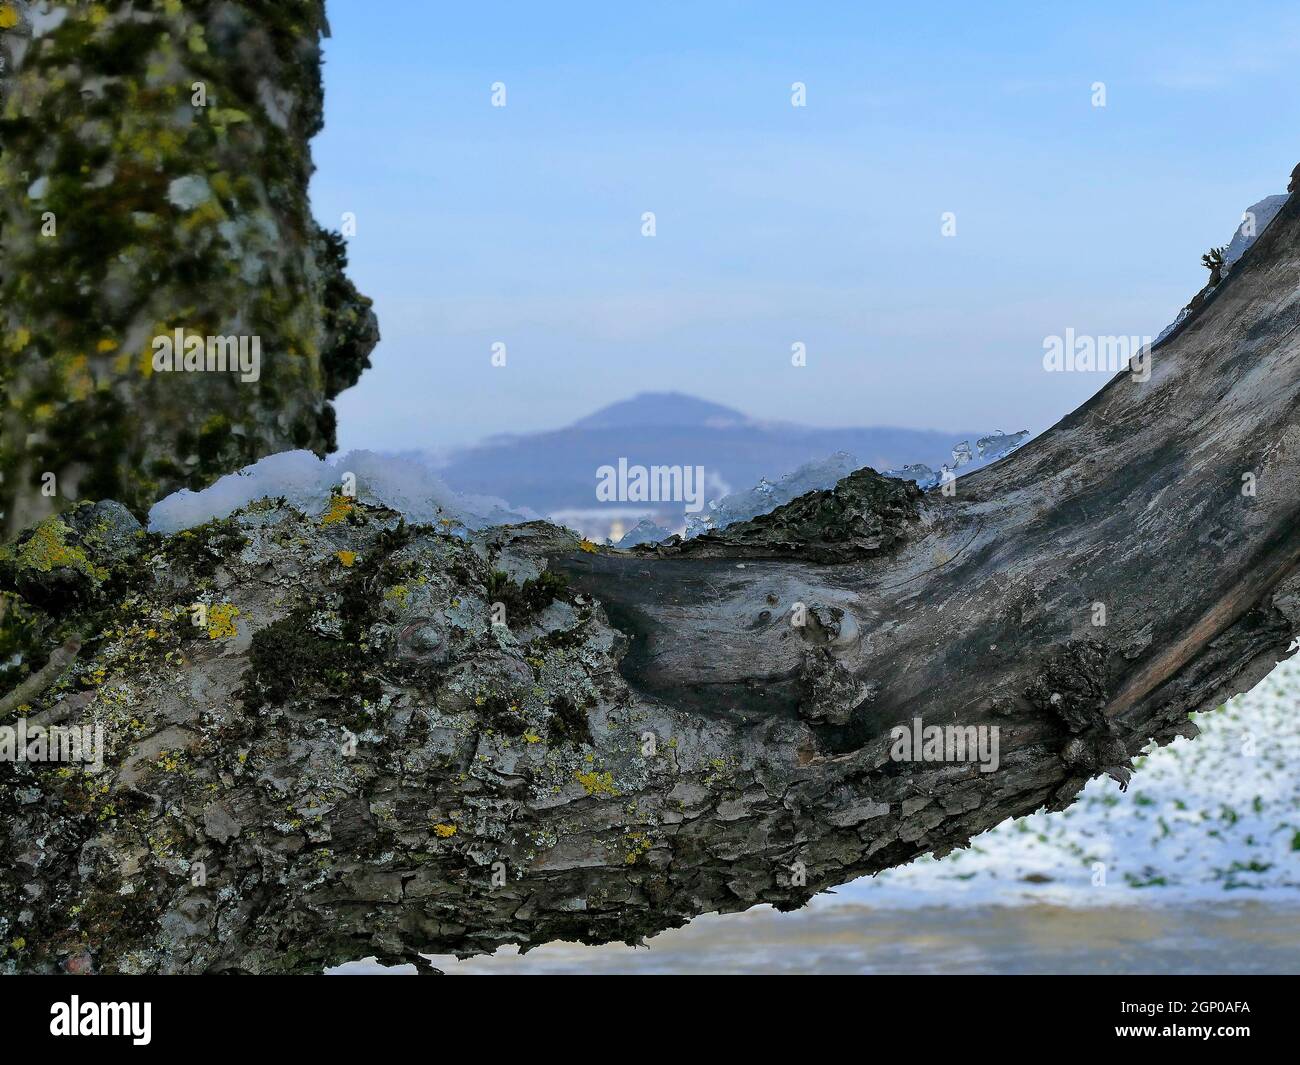 Panoramic view to the hill Hohenstaufen through a branch frame Stock Photo